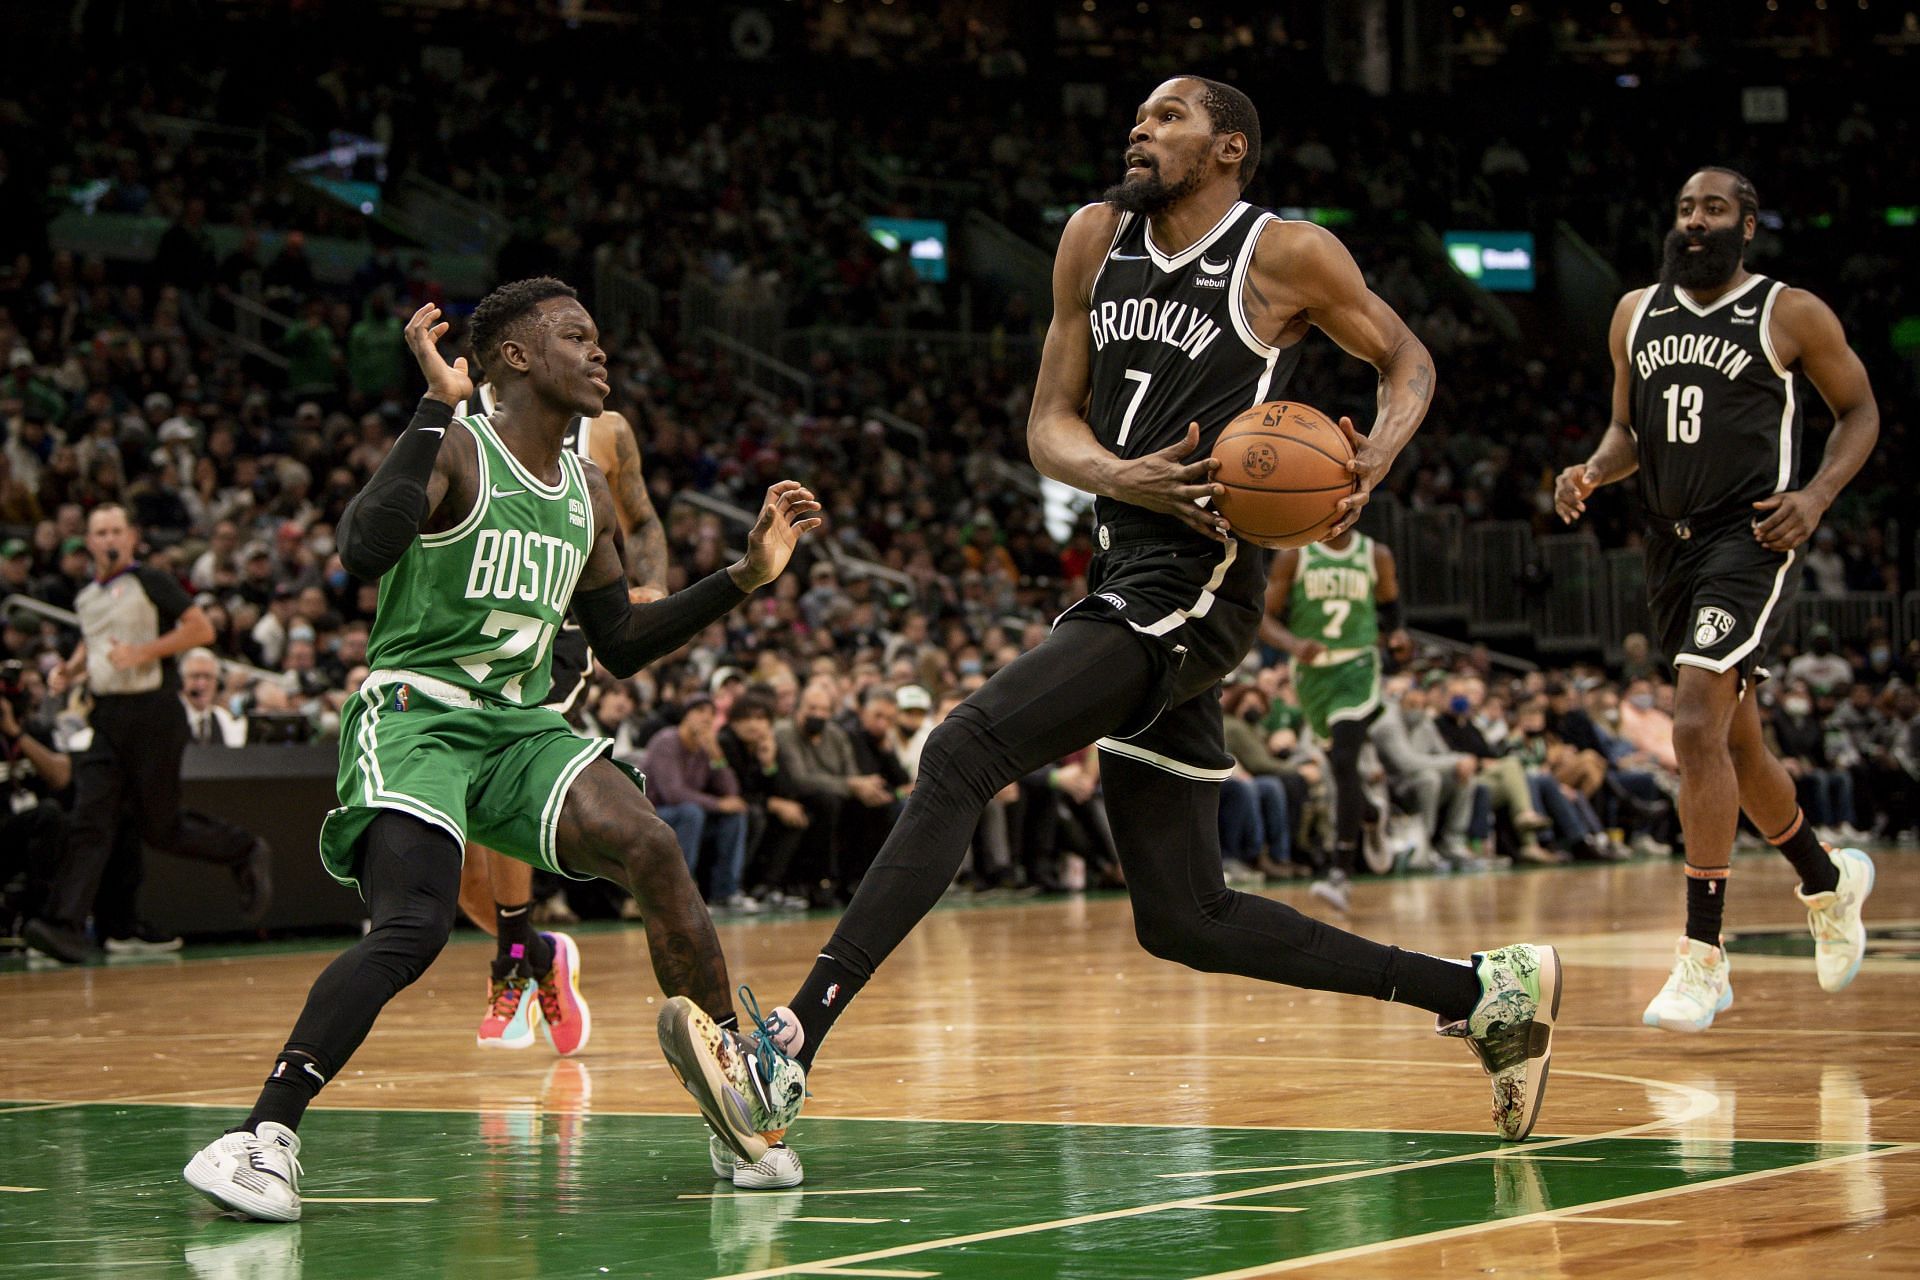 Kevin Durant (#7) of the Brooklyn Nets drives to the basket against the Boston Celtics.